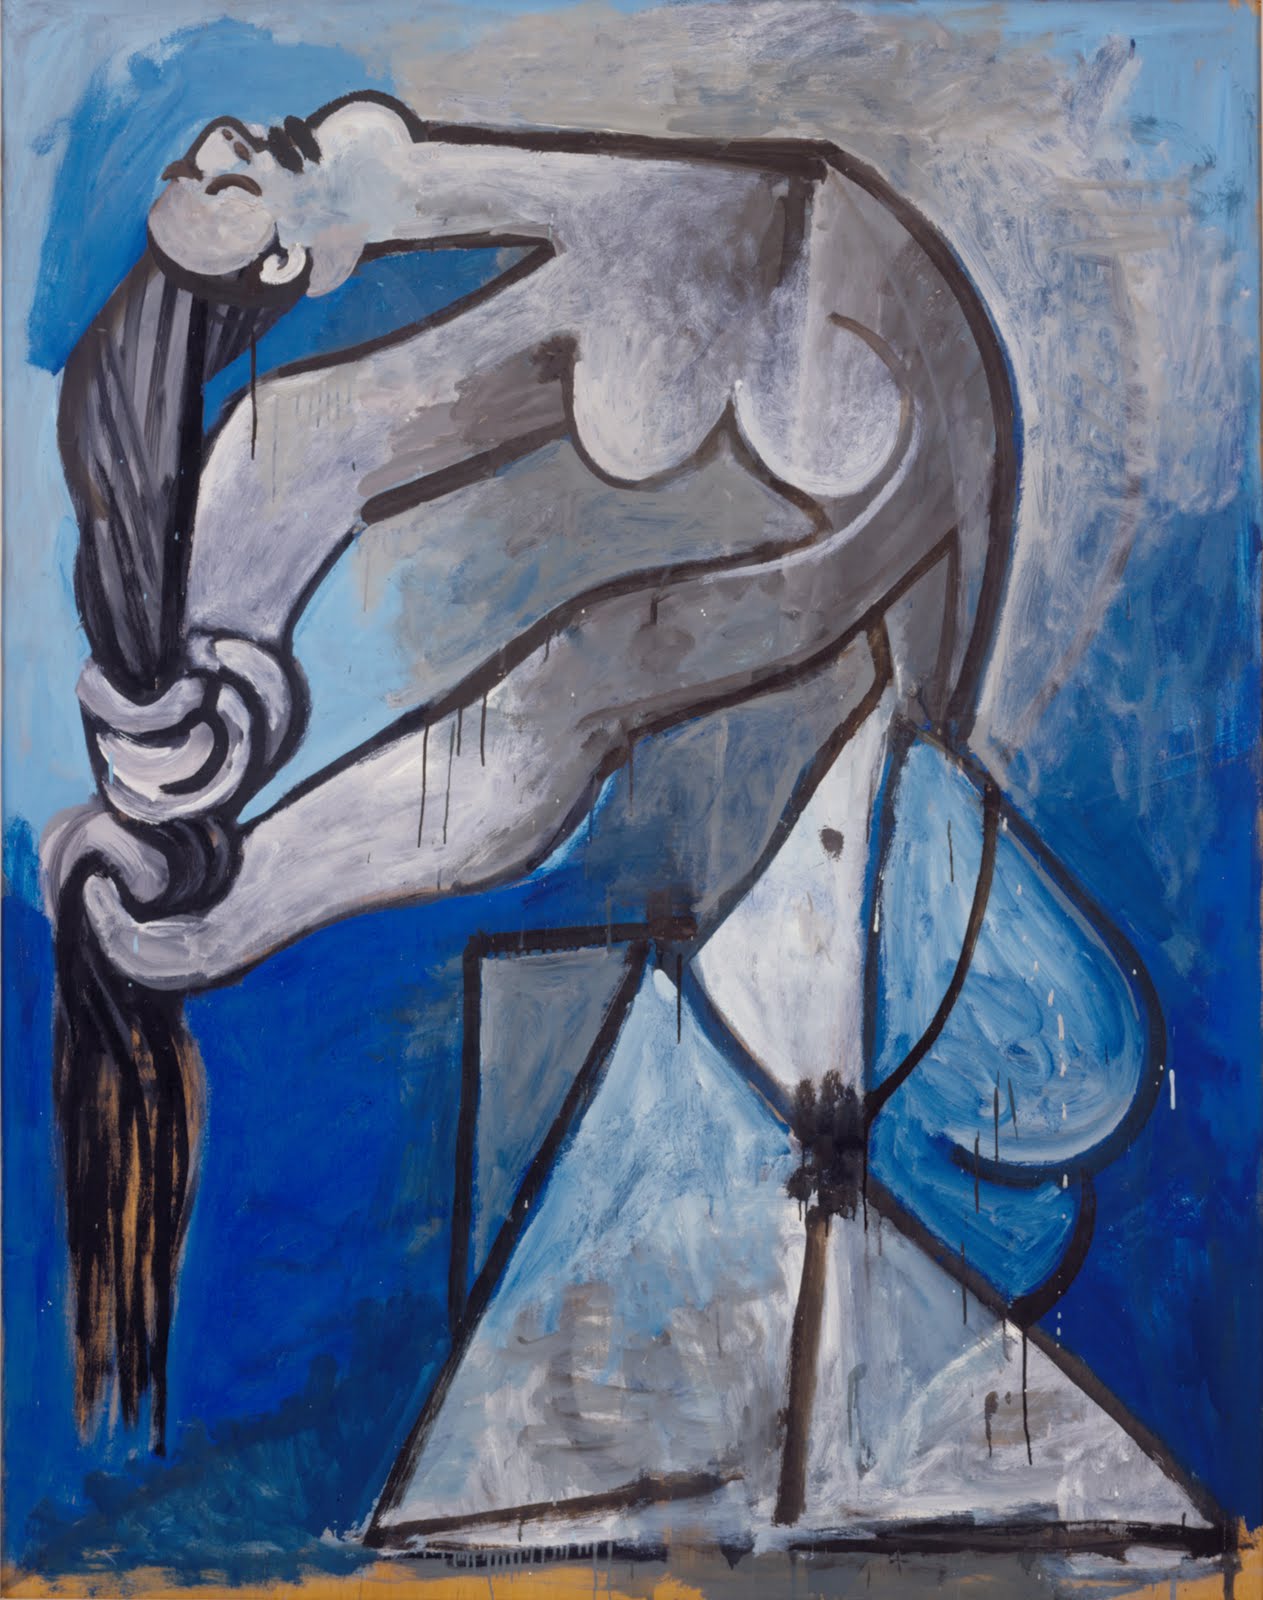 London Picasso Exhibition The Large Nude National Gallery 14